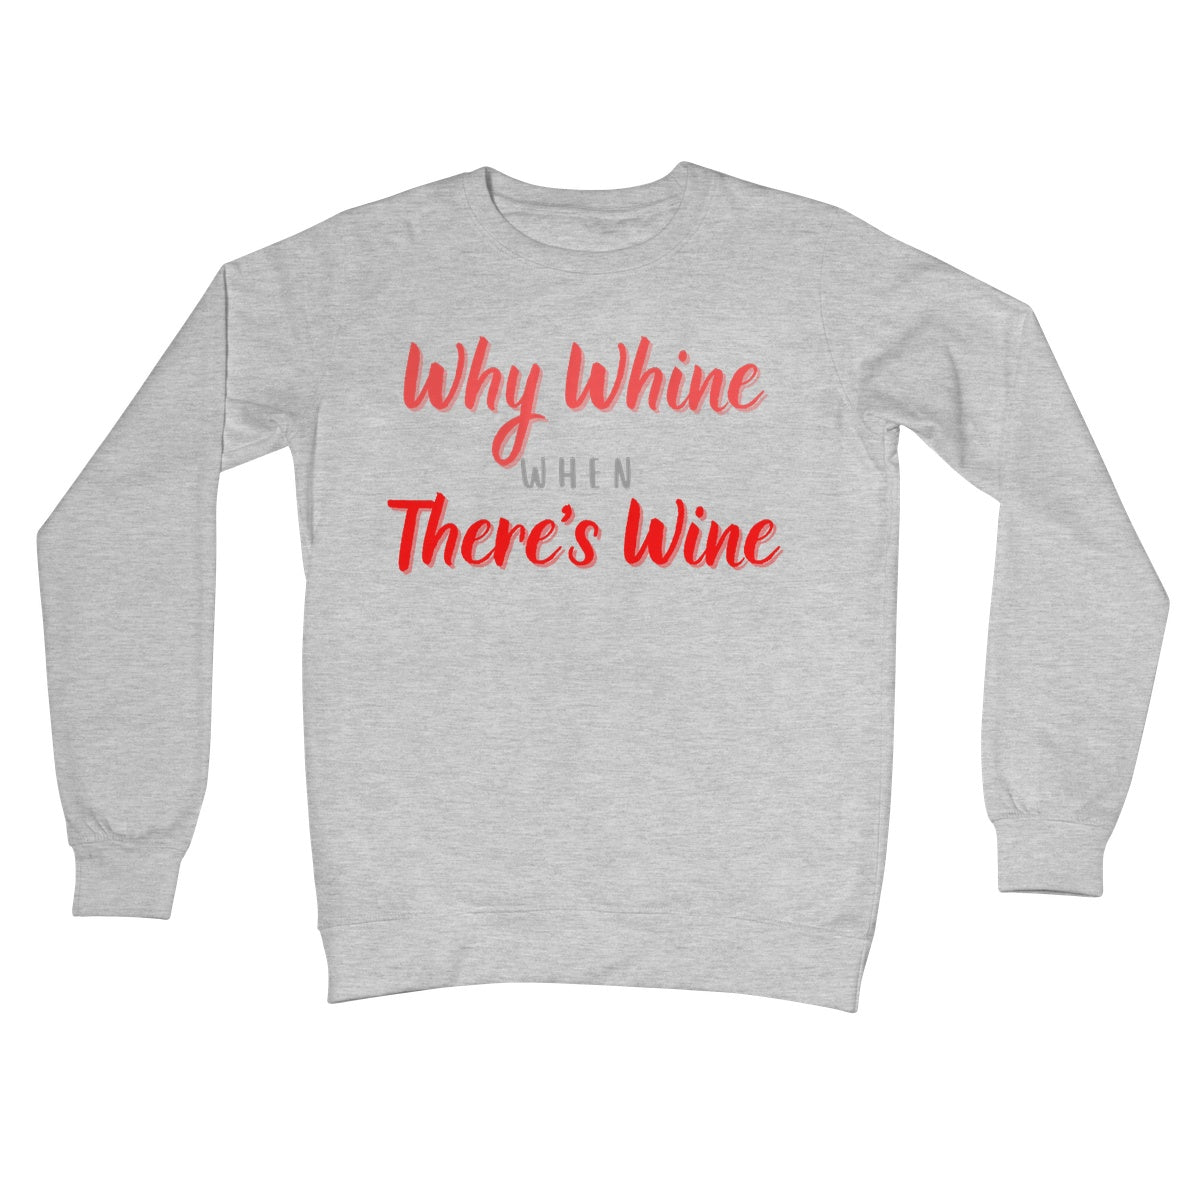 why whine when there's wine jumper grey